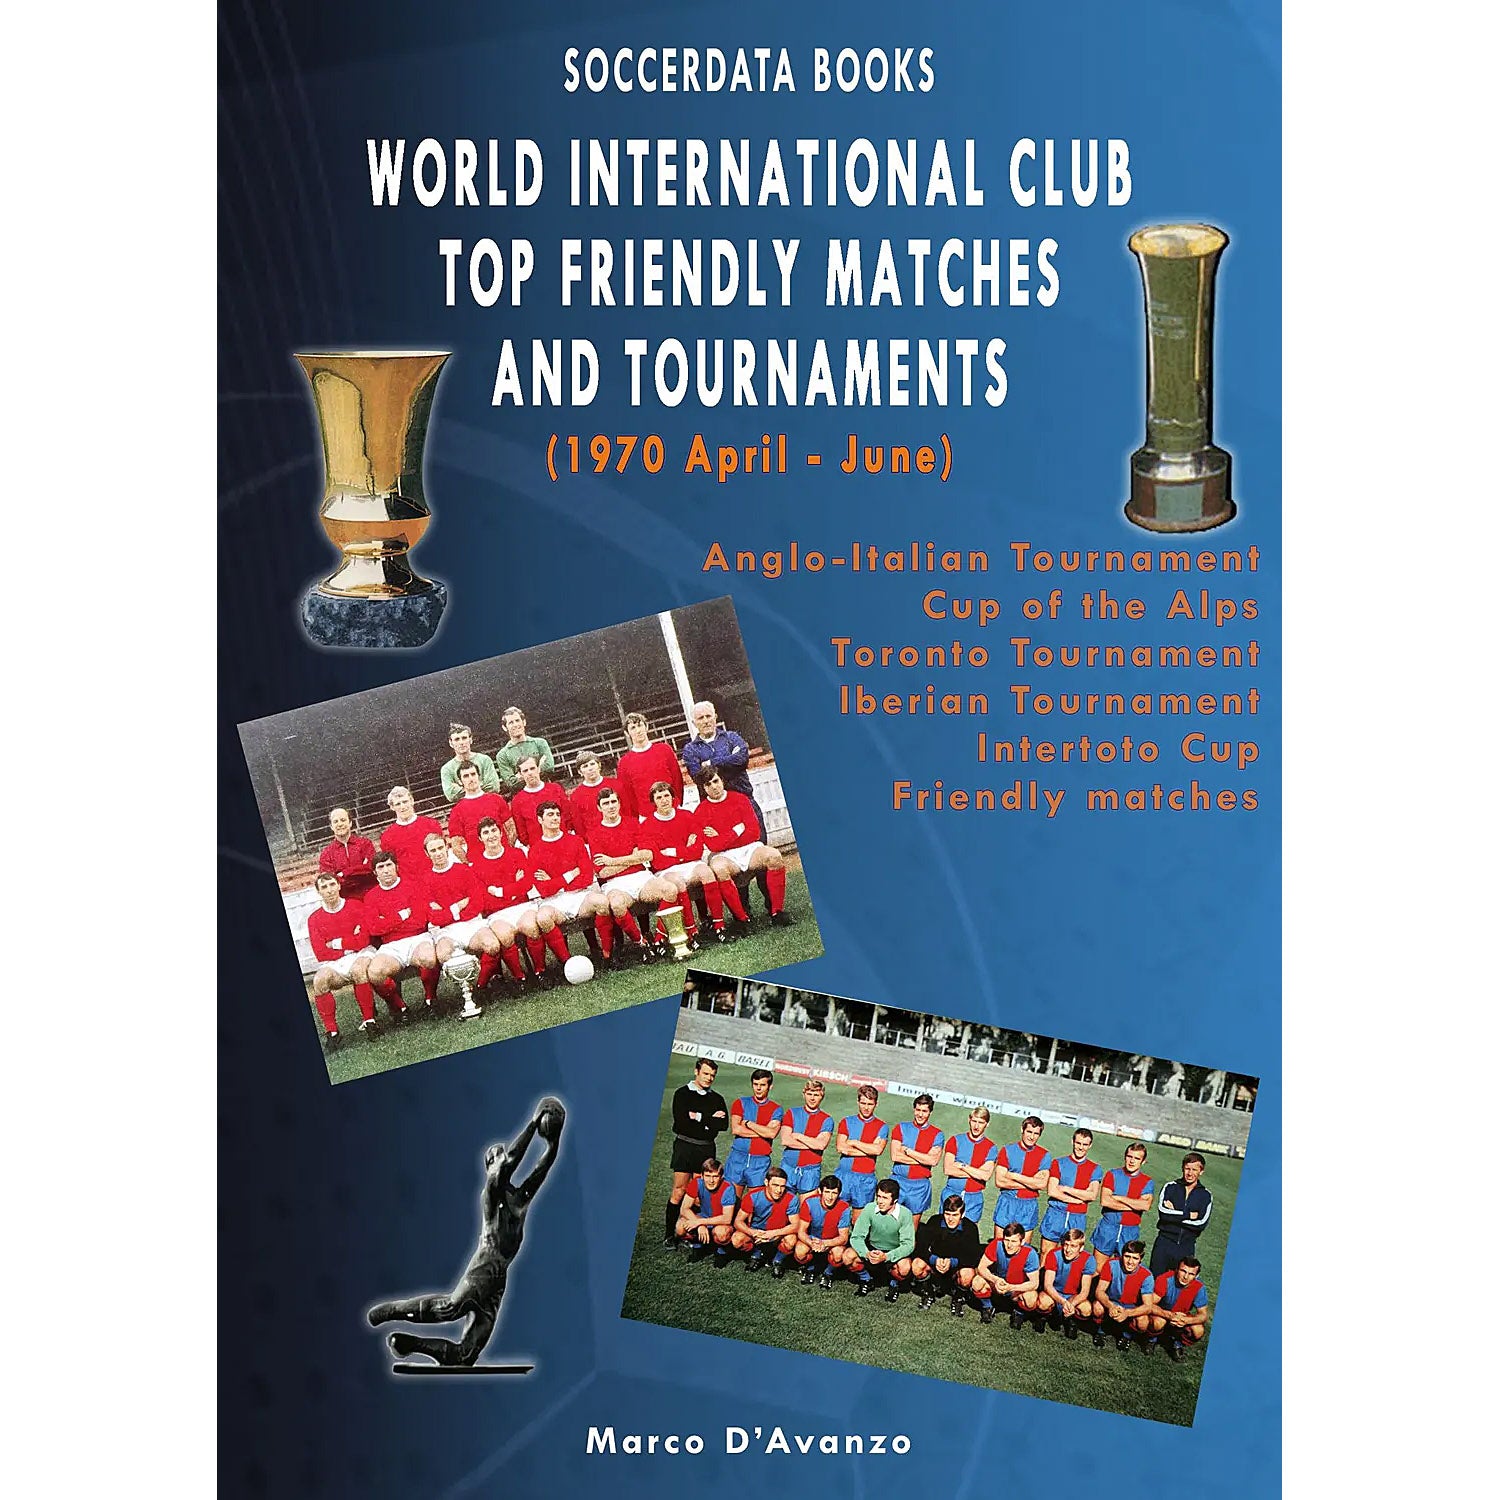 World International Club Top Friendly Matches and Tournaments (1970 April to June)